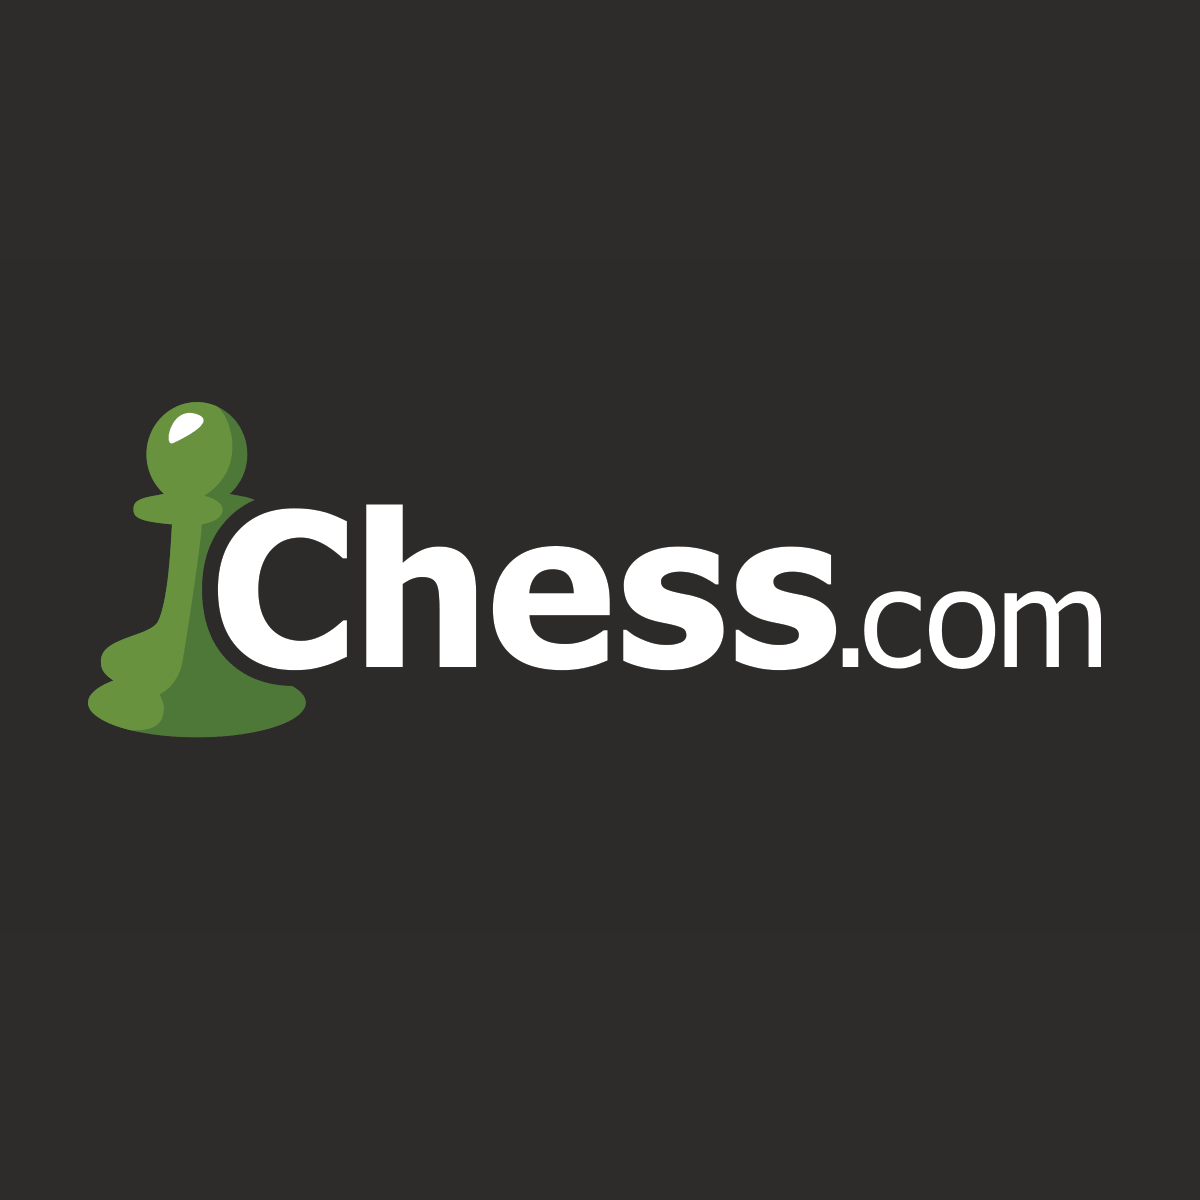 10:01 PG - 27 Mac 2019. https://www.chess.com/learn-how-to-play-chess. 